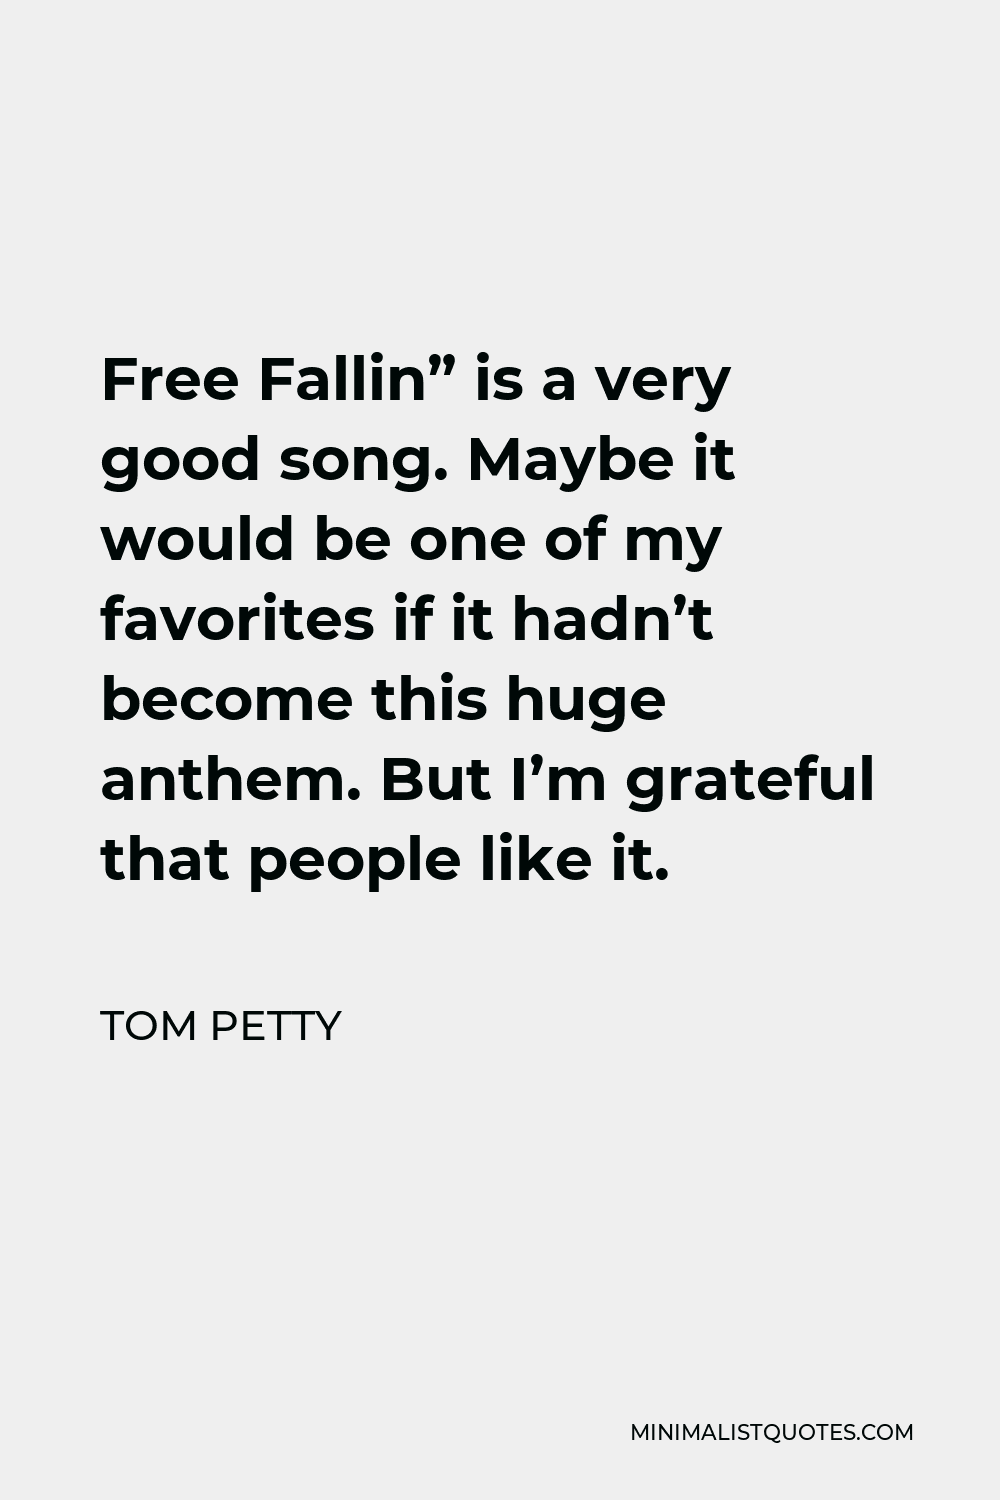 Tom Petty Quote - Free Fallin” is a very good song. Maybe it would be one of my favorites if it hadn’t become this huge anthem. But I’m grateful that people like it.